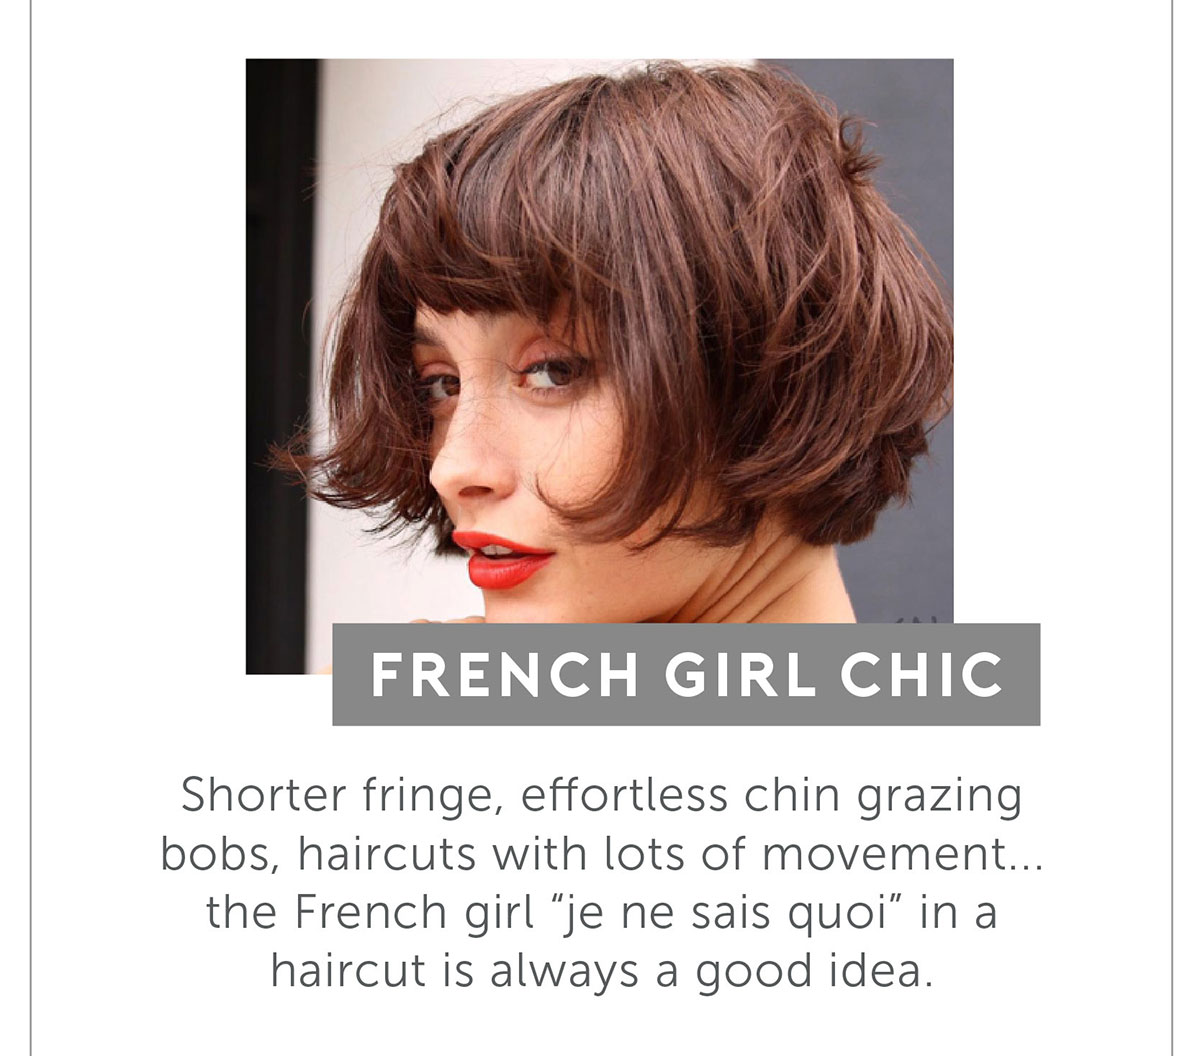 French Girl Chic. Shorter fringe, effortless chin grazing bobs, haircuts with lots of movement...the French girl “je ne sais quoi” in a haircut is always a good idea.